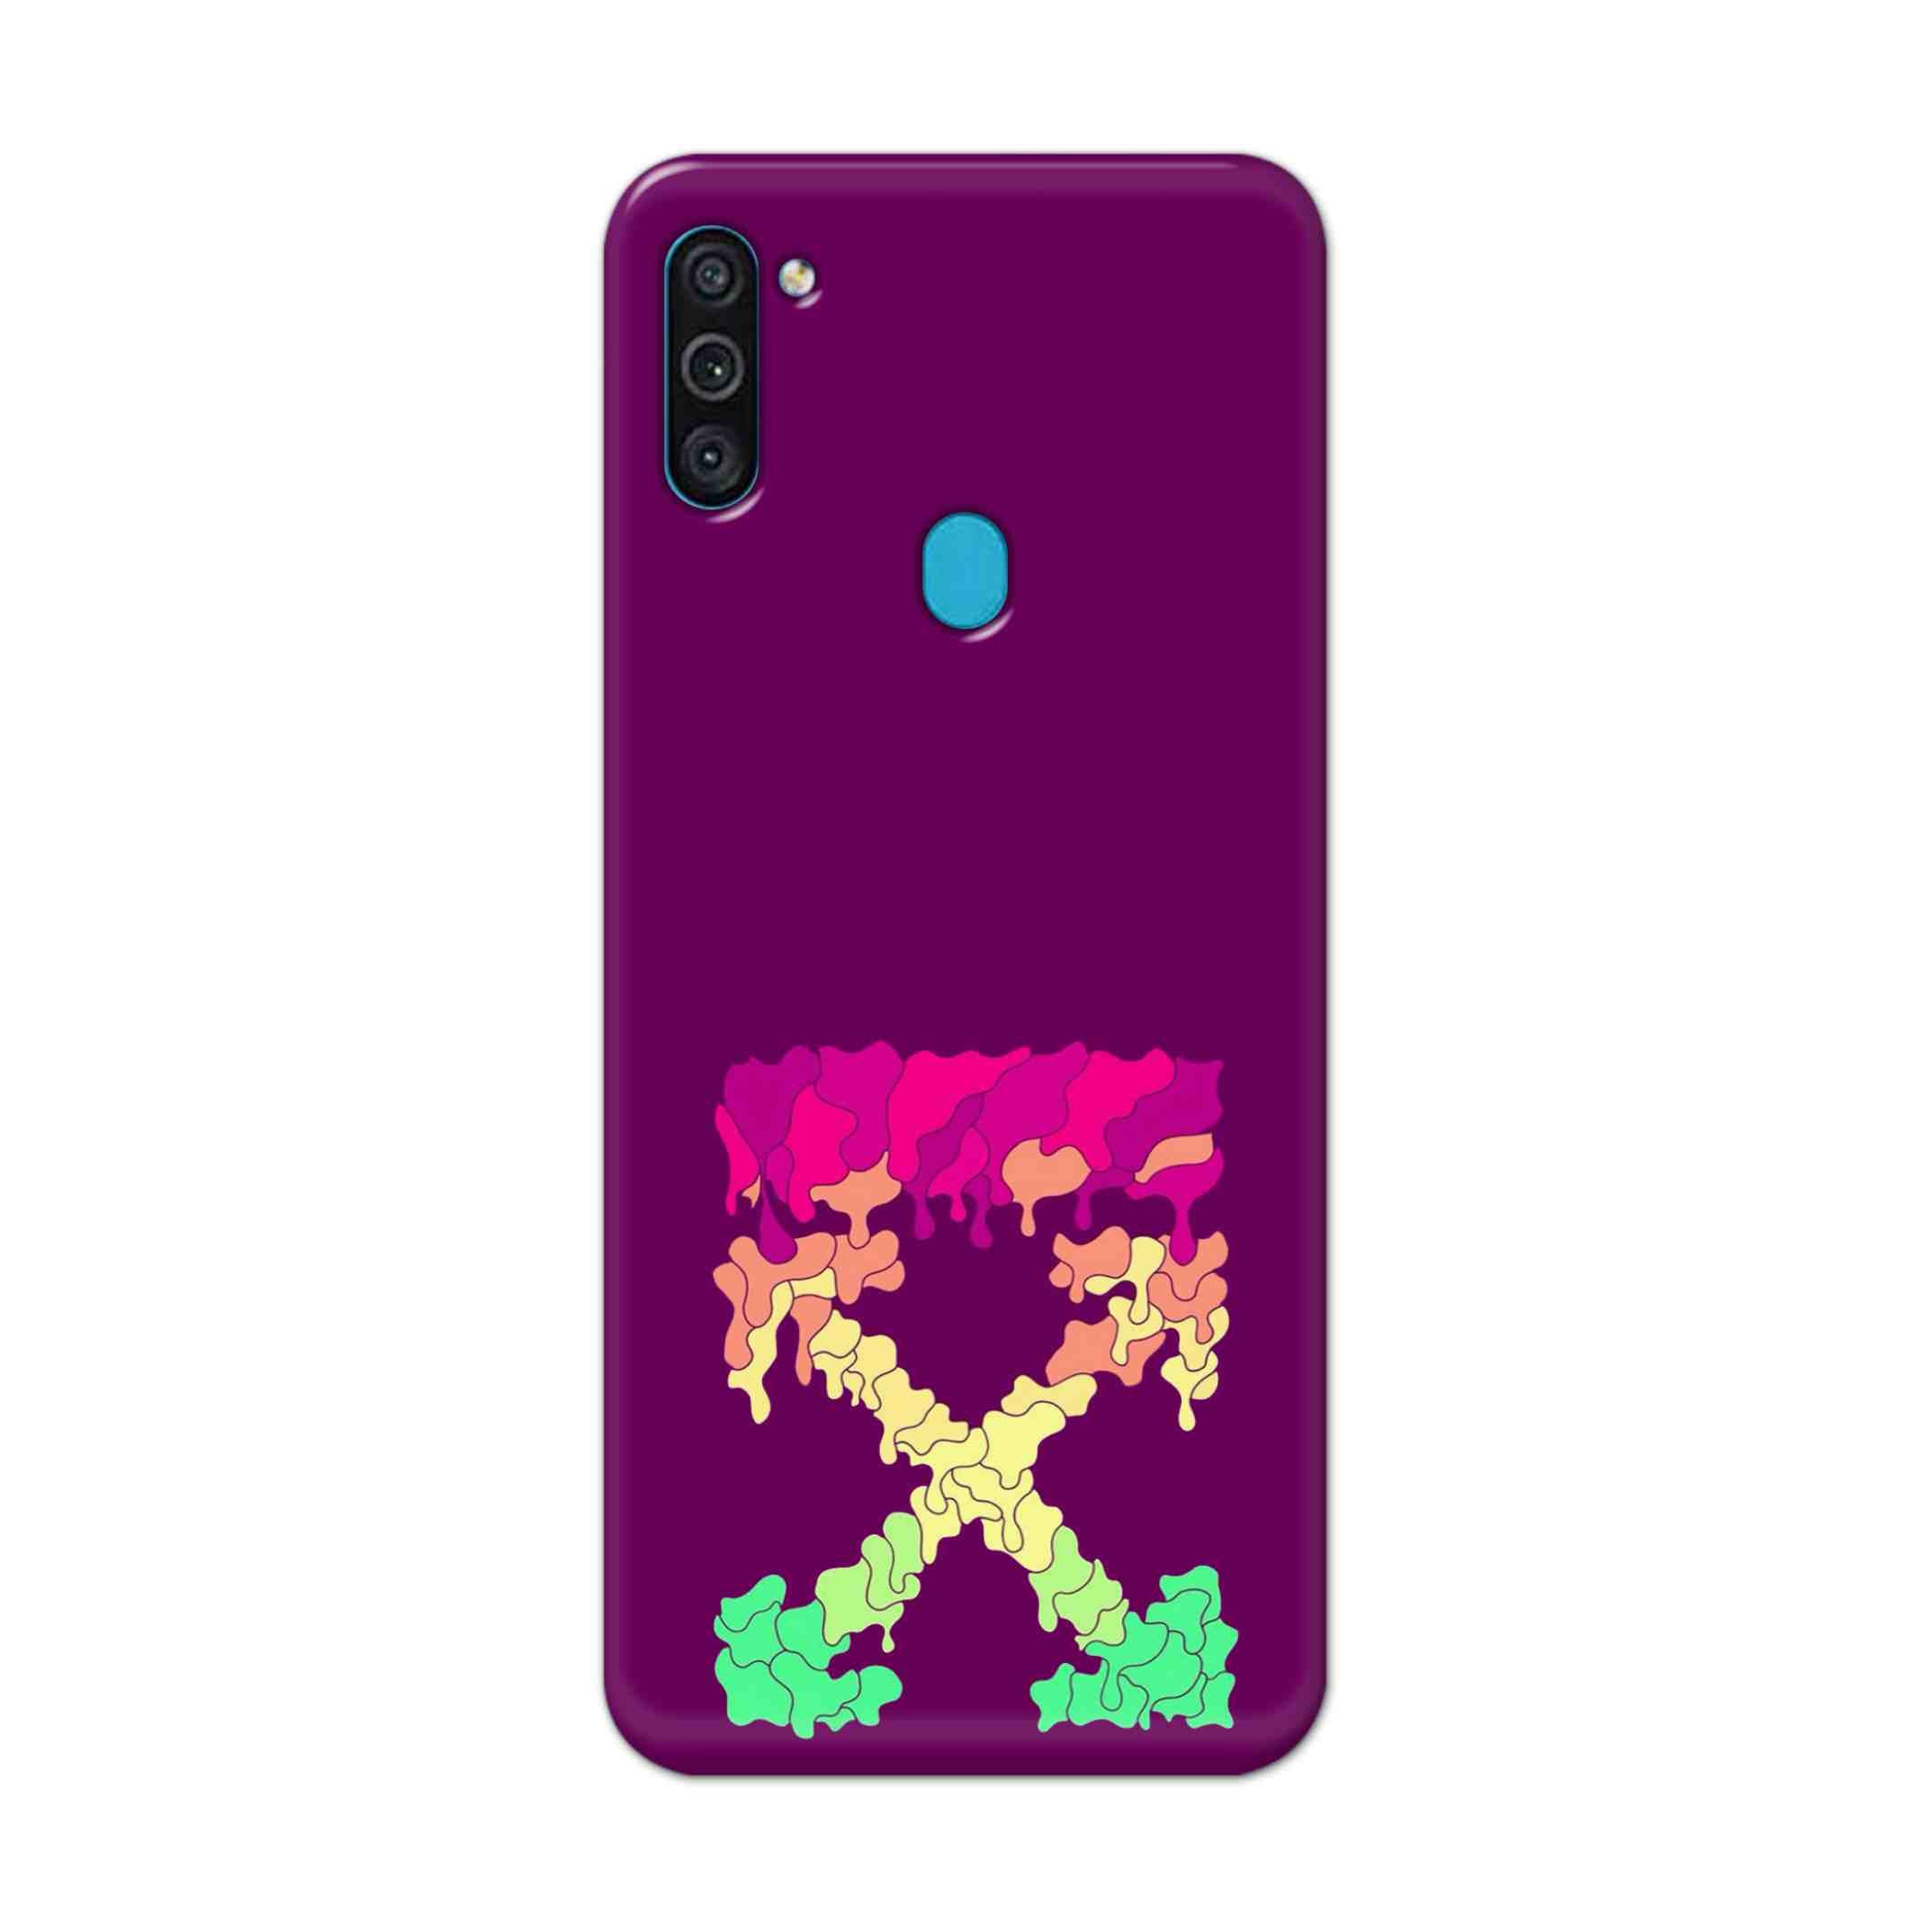 Buy X.O Hard Back Mobile Phone Case Cover For Samsung Galaxy M11 Online